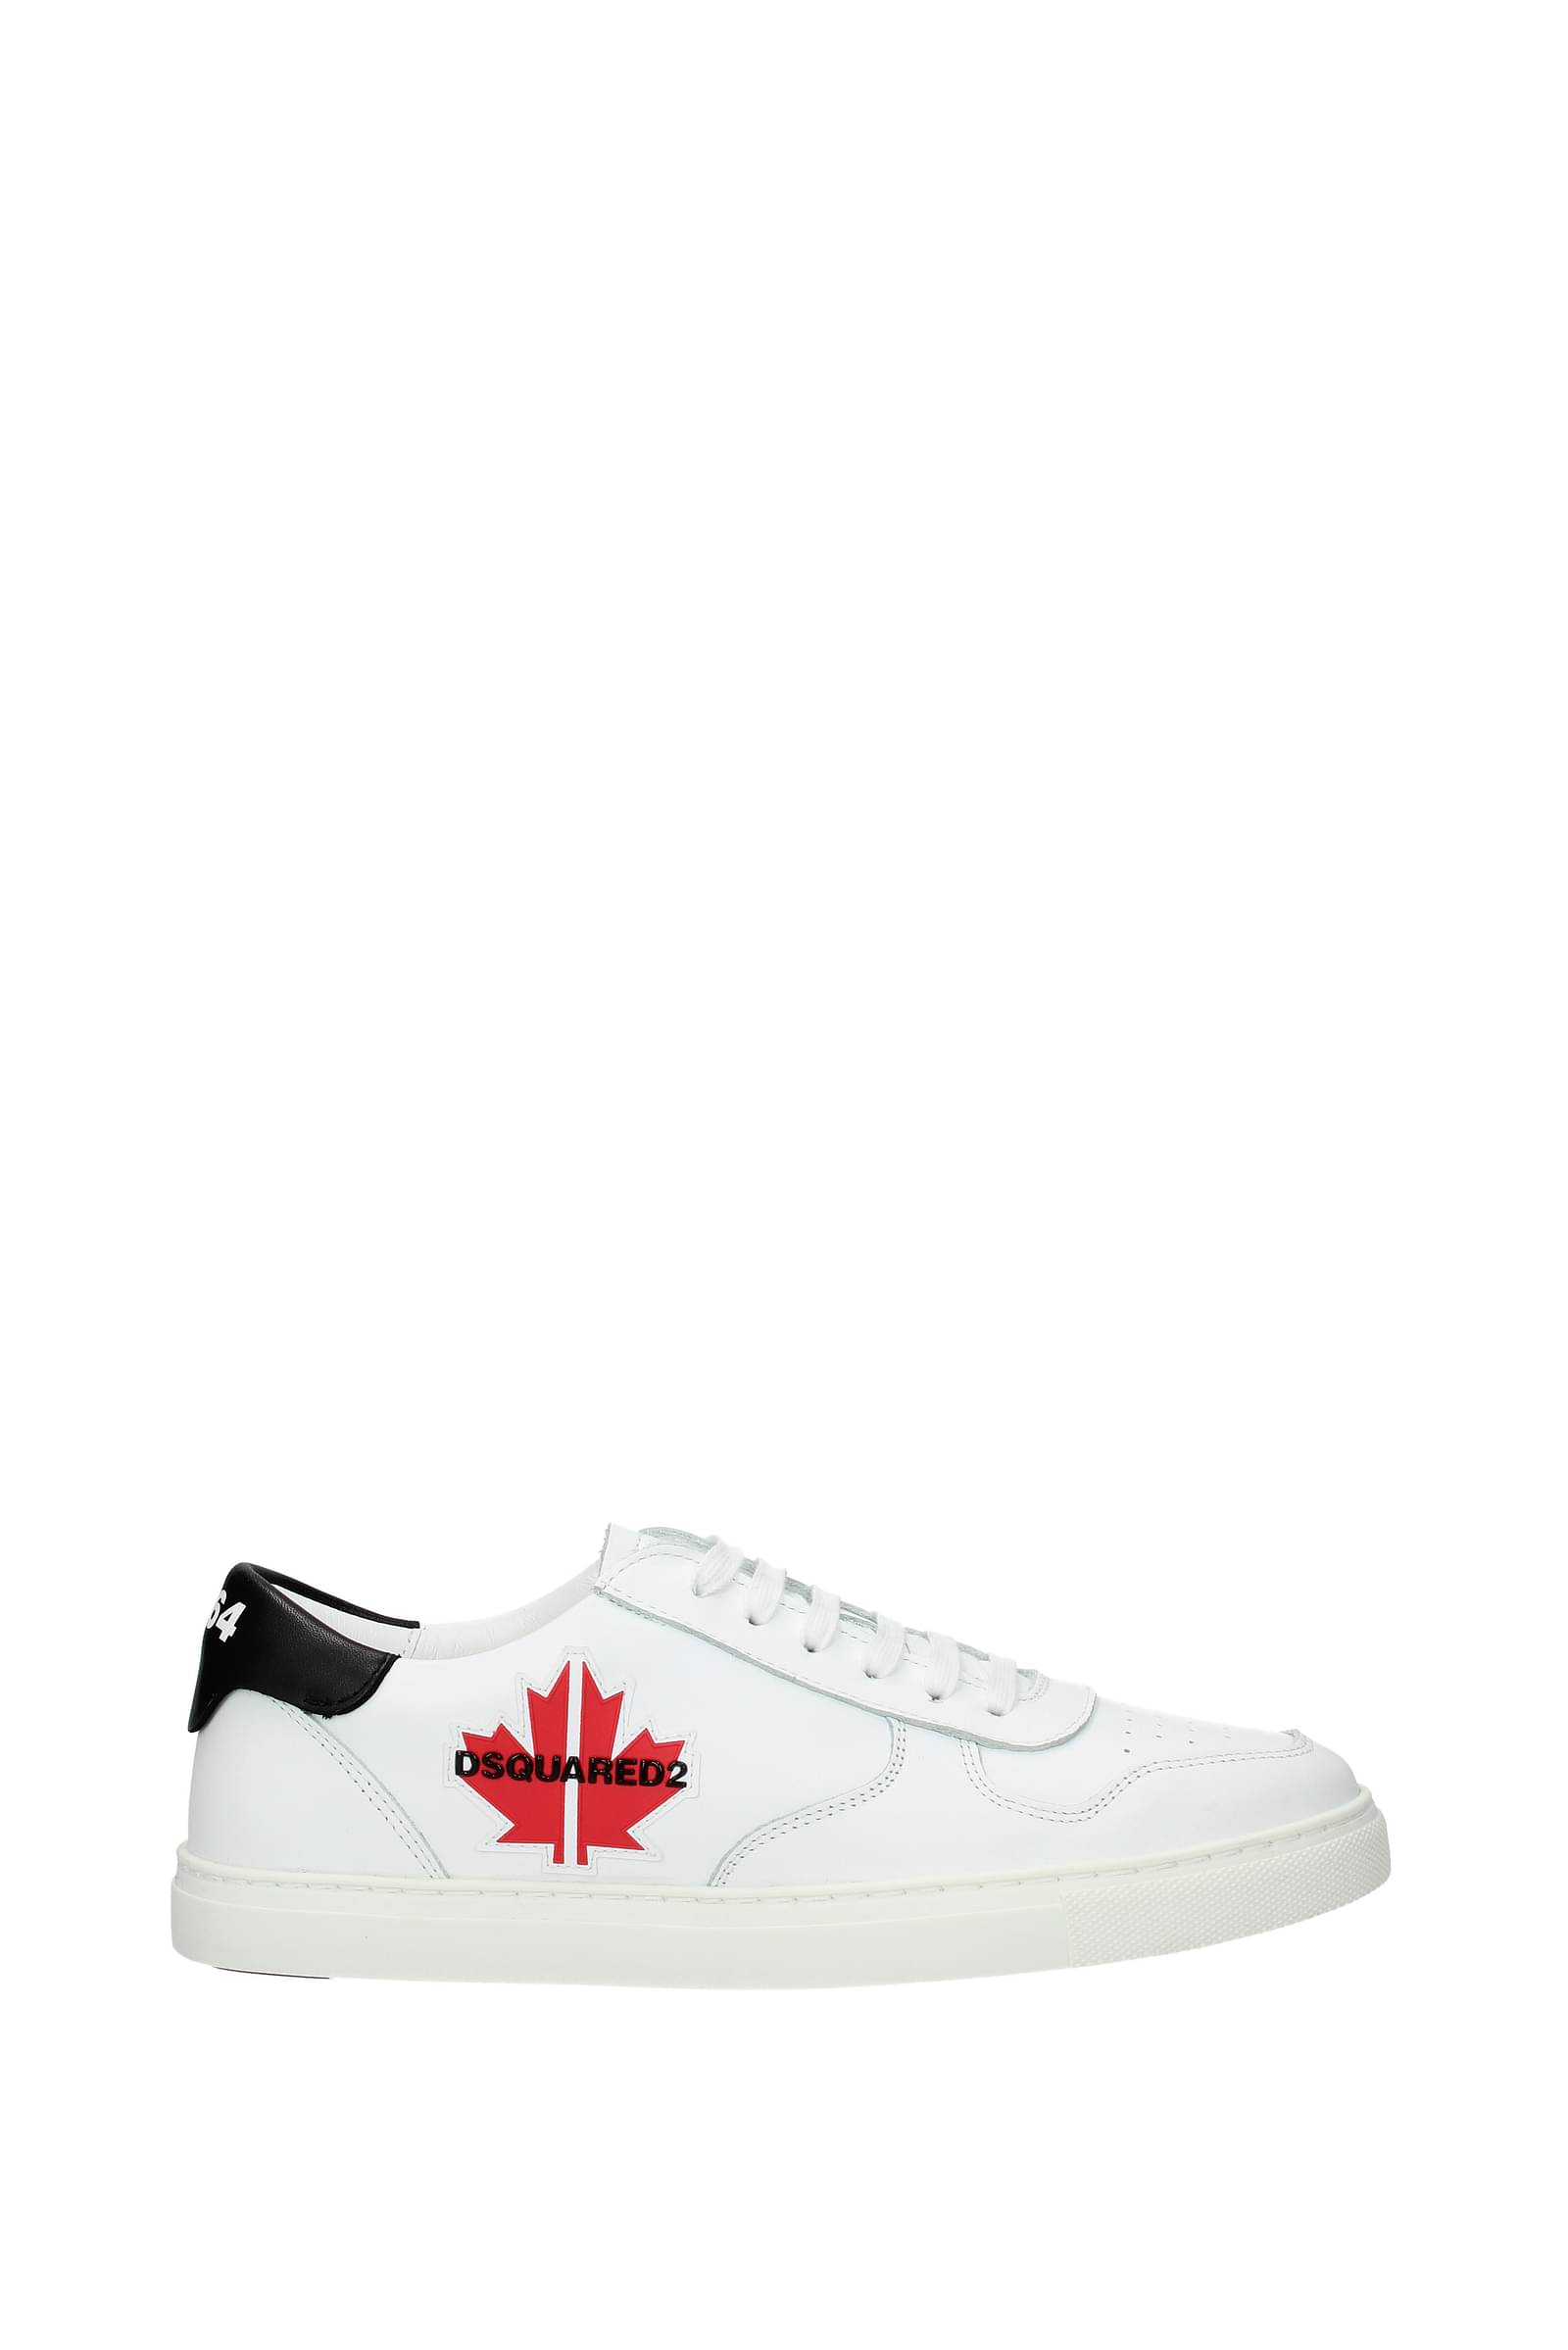 Discounted Dsquared2 sneakers: up to 50 